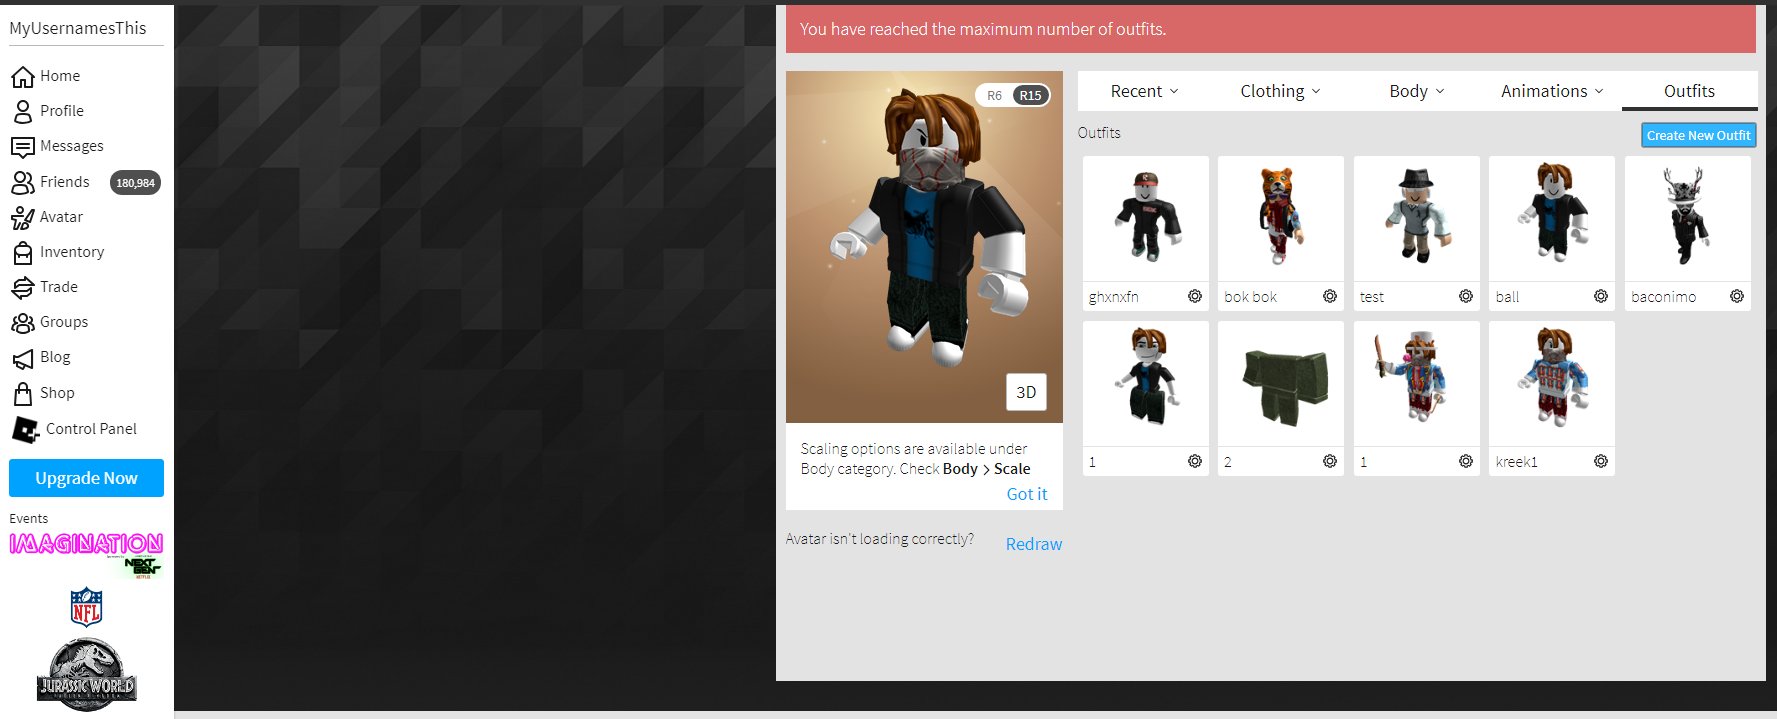 Myusernamesthis Use Code Bacon On Twitter So My Alt Can Have A Lot Of Outfits But My Main Maxxes Out At 9 Roblox Somethings Messed Up Here - myusernamesthis roblox username